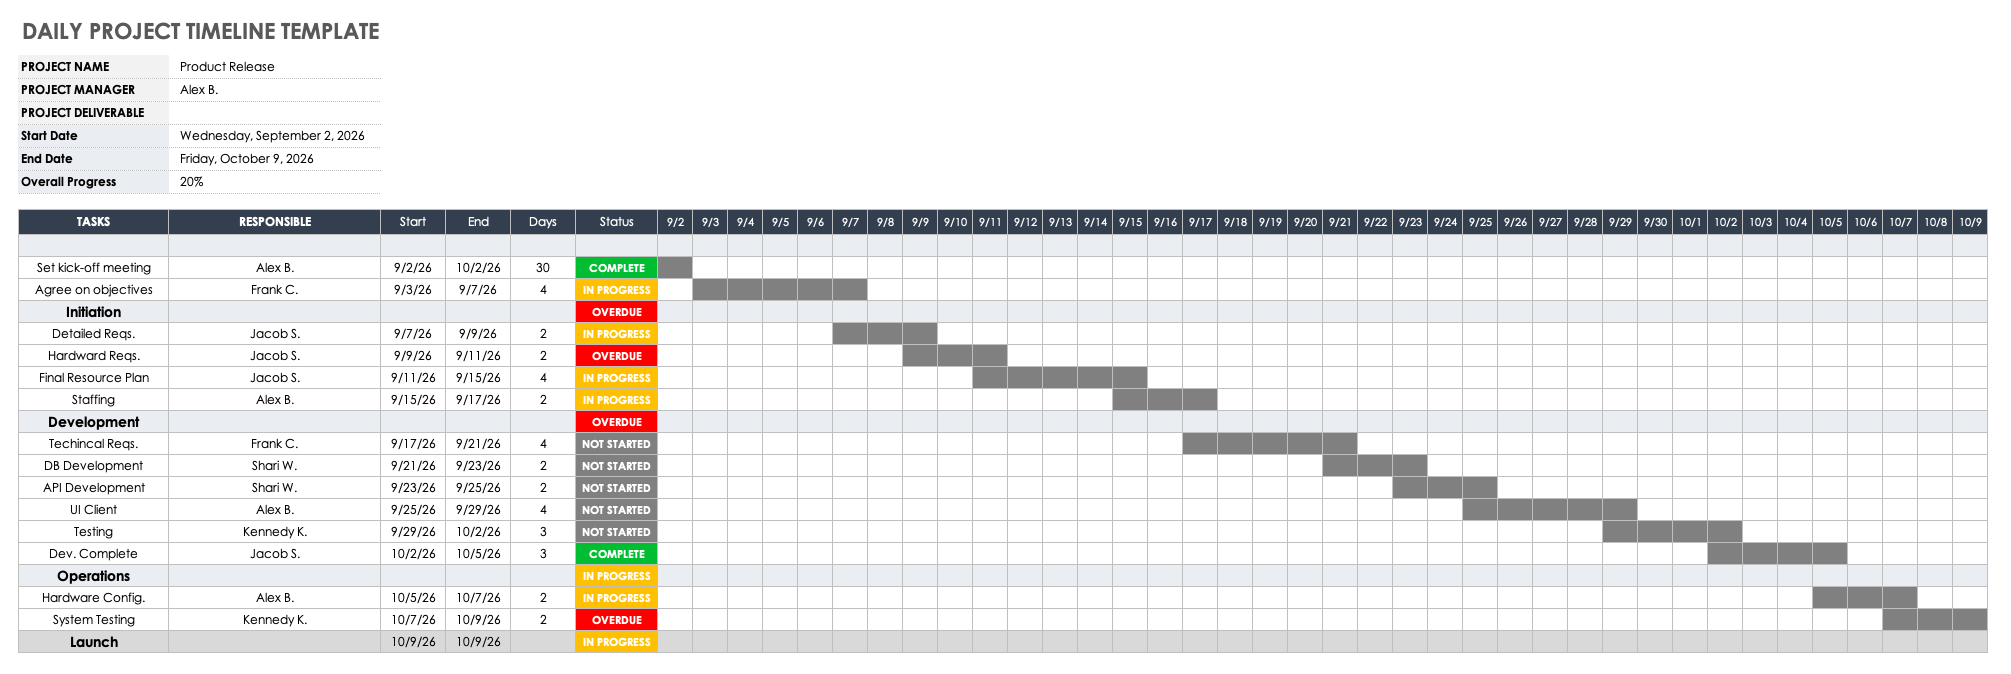 hourly-project-timeline-template-excel